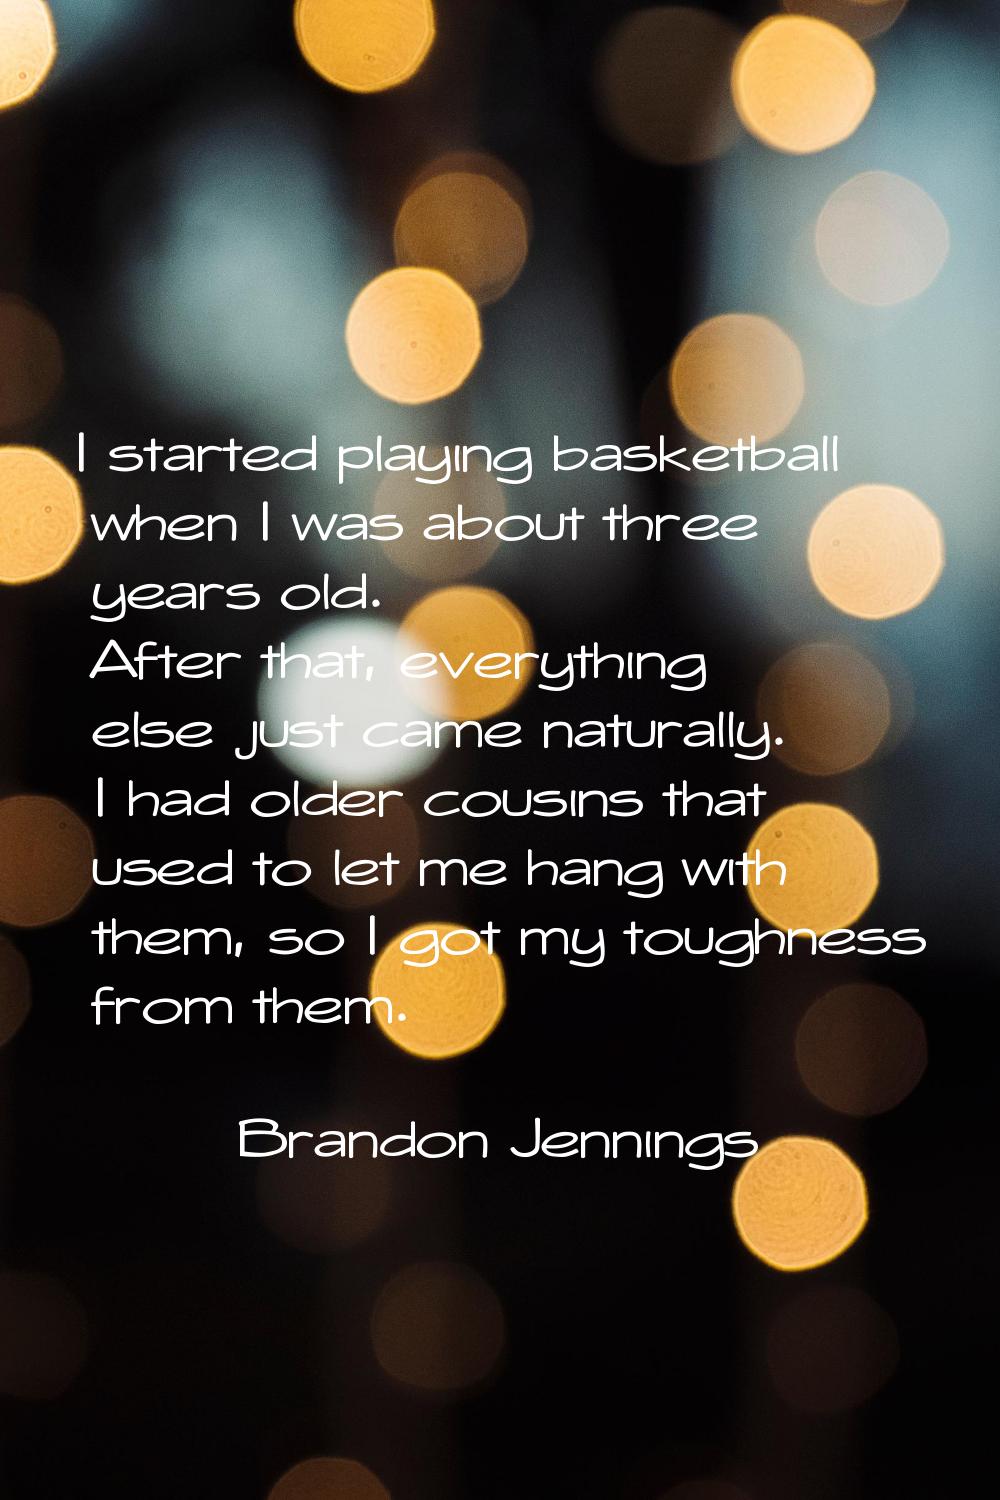 I started playing basketball when I was about three years old. After that, everything else just cam